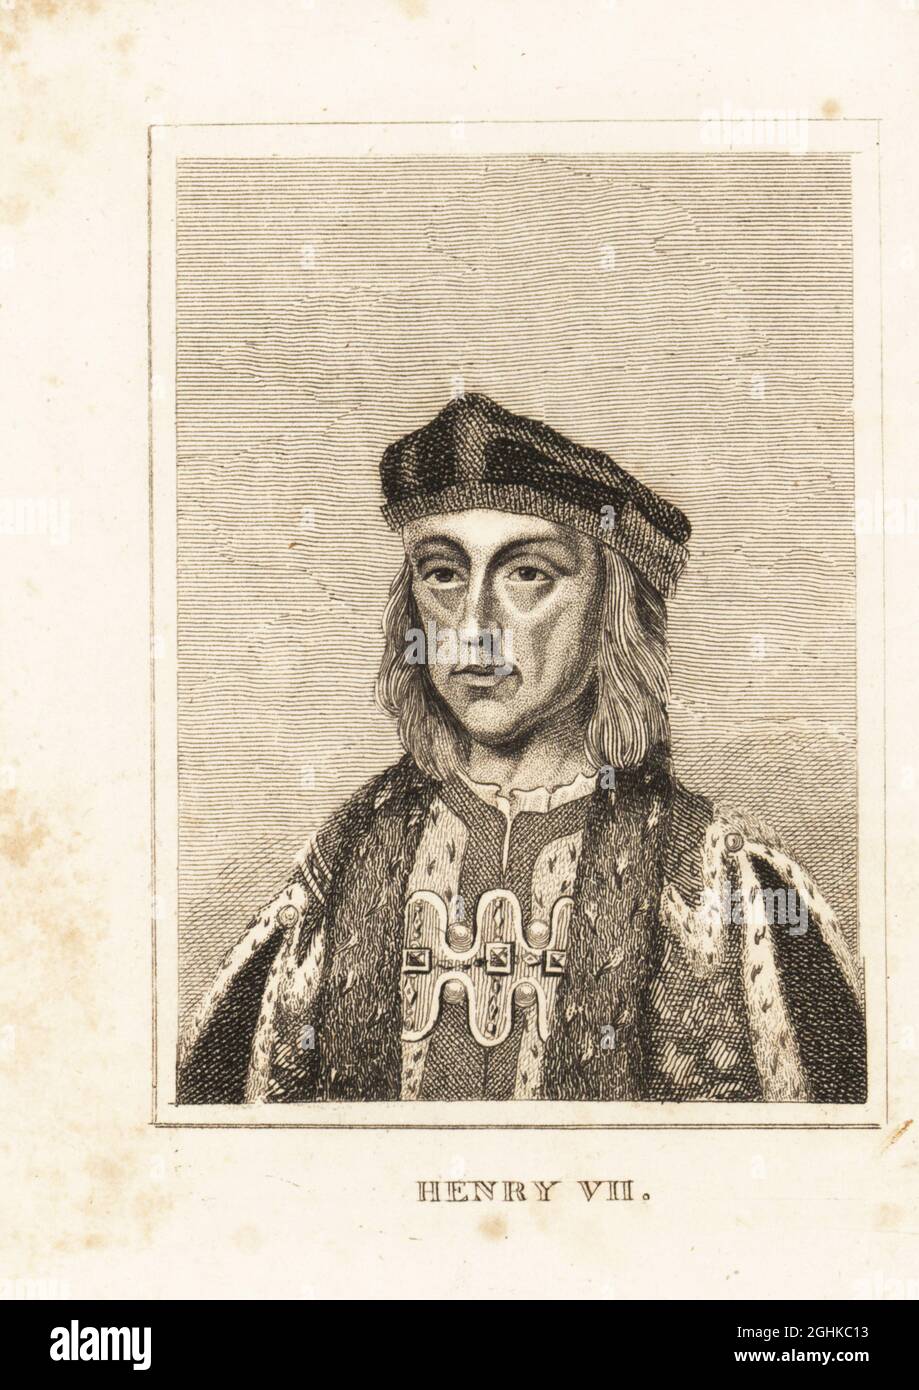 Portrait of King Henry VII of England, 1457-1509. Copperplate engraving from M. A. Jones’ History of England from Julius Caesar to George IV, G. Virtue, 26 Ivy Lane, London, 1836. Stock Photo